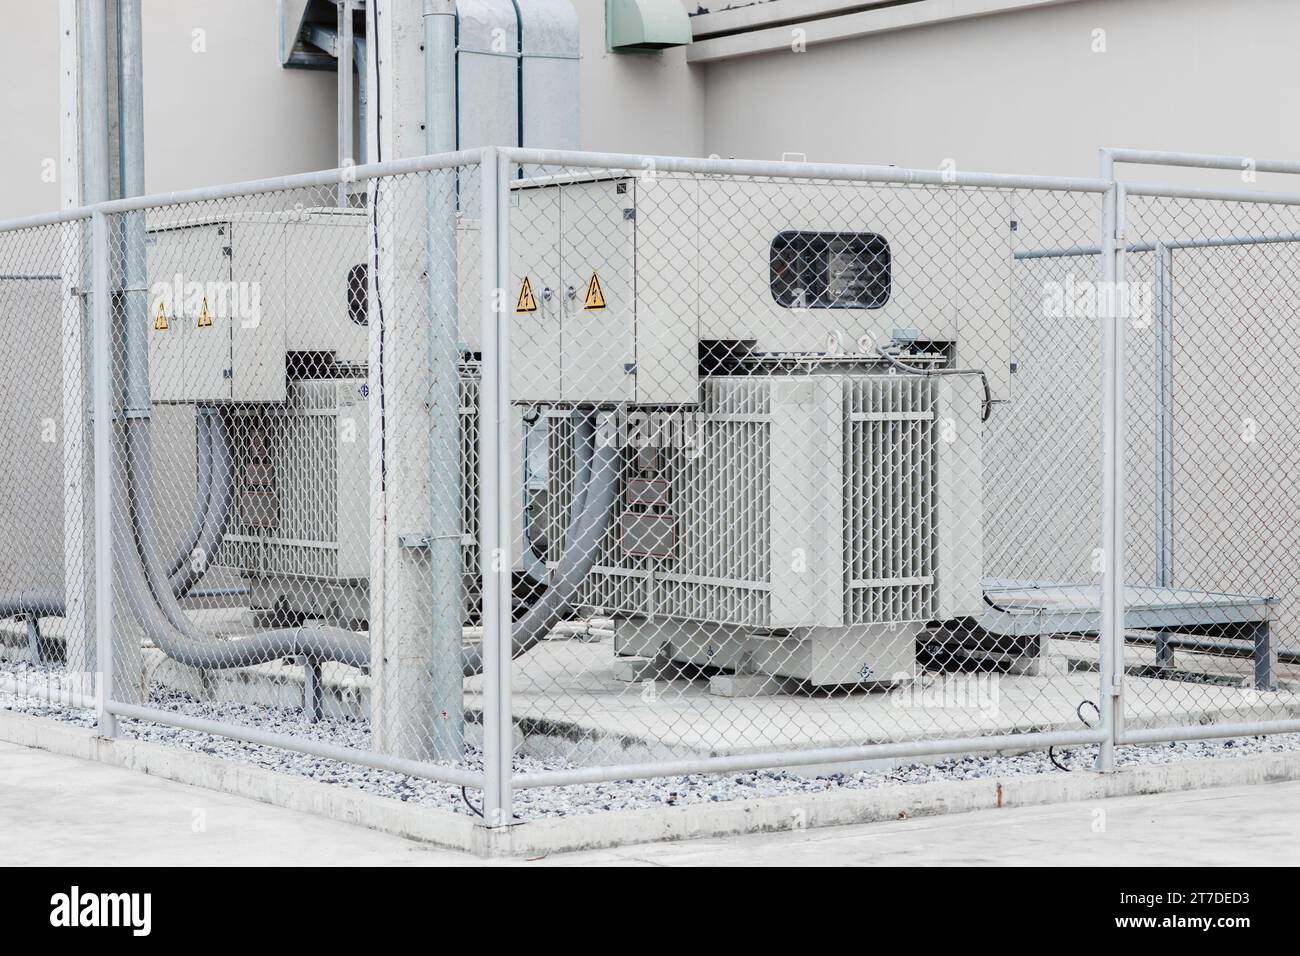 Electricity transformer high voltage Three phase electric power with safety area fence protection zone in industry building. Stock Photo